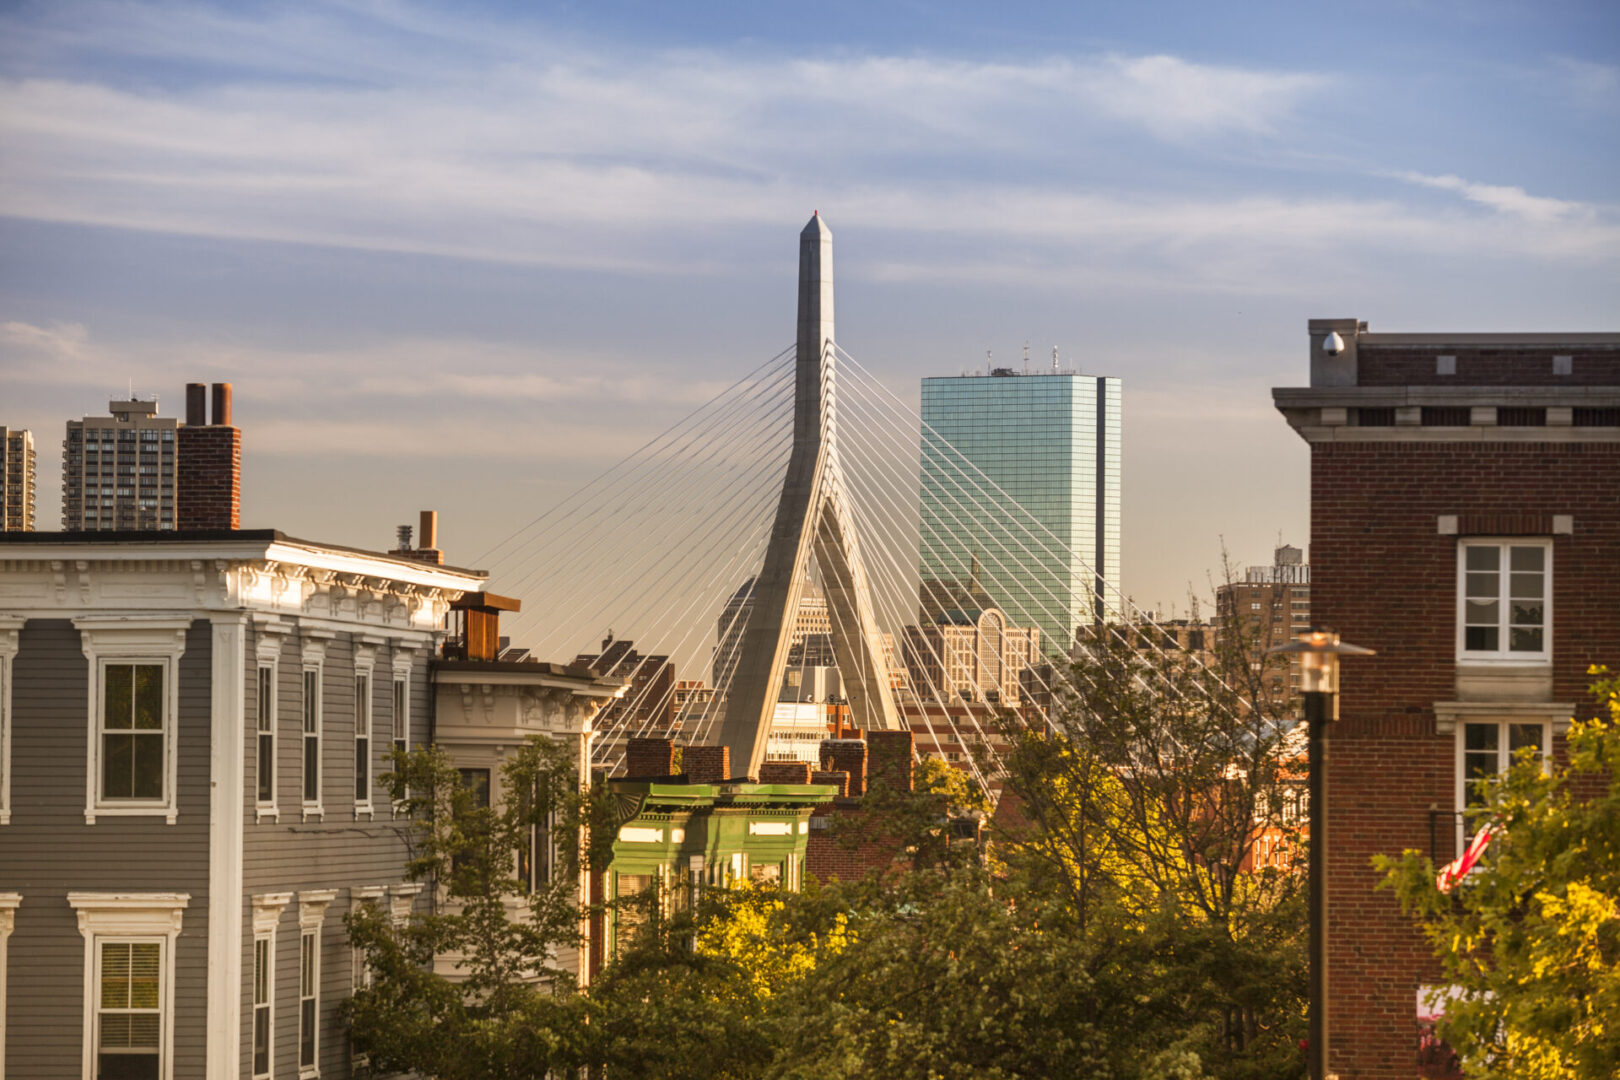 Modern bridge in Boston Massachusetts from atop Bunker Hill.  The Bridge is named after civil rights activist Lenny Zakim and the American colonists who fought the British in the Battle of Bunker Hill